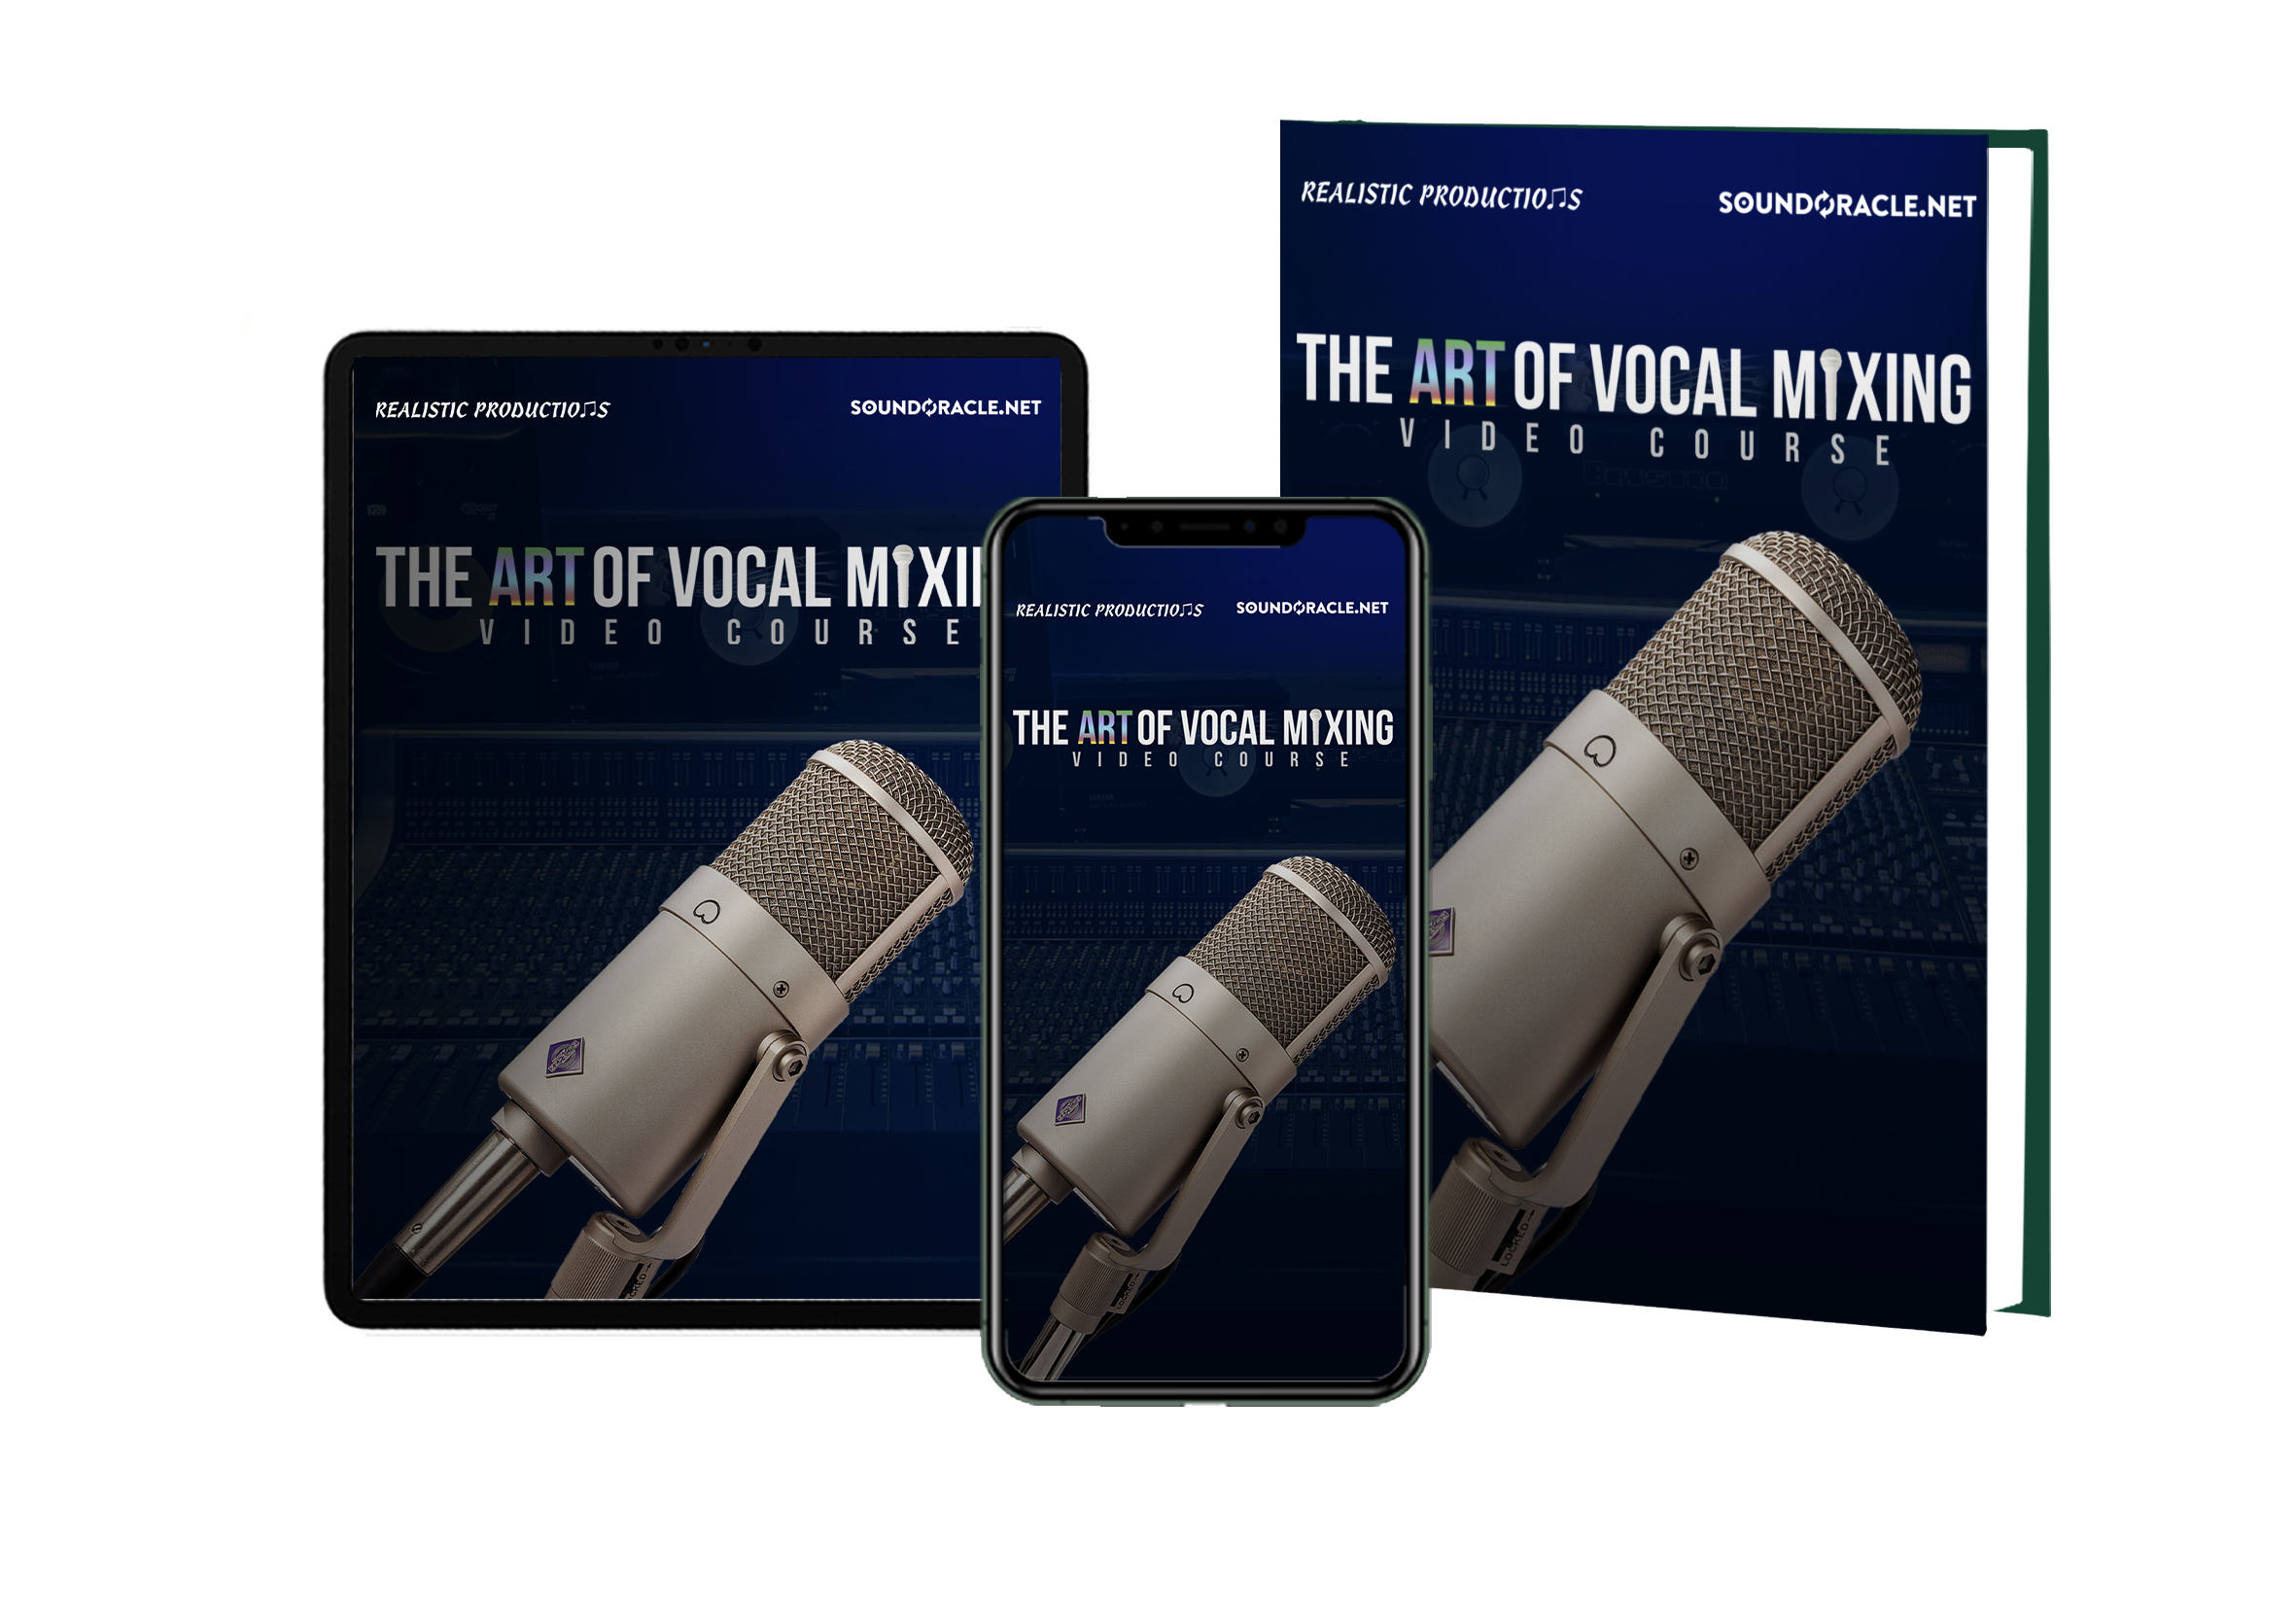 The Art of Vocal Mixing